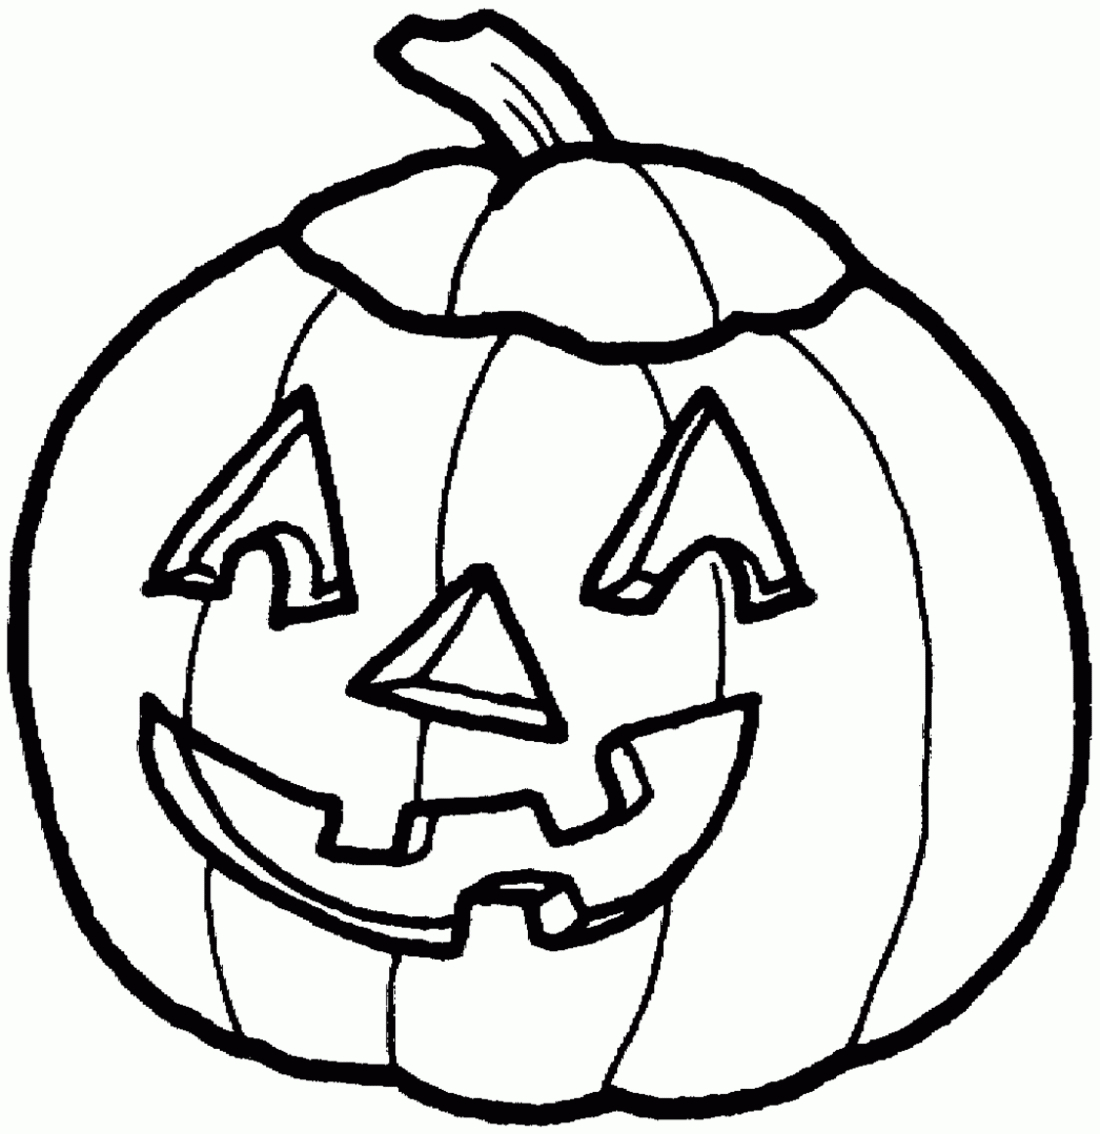 Coloring Page Of Pumpkin Free Printable Pumpkin Coloring Pages For Kids